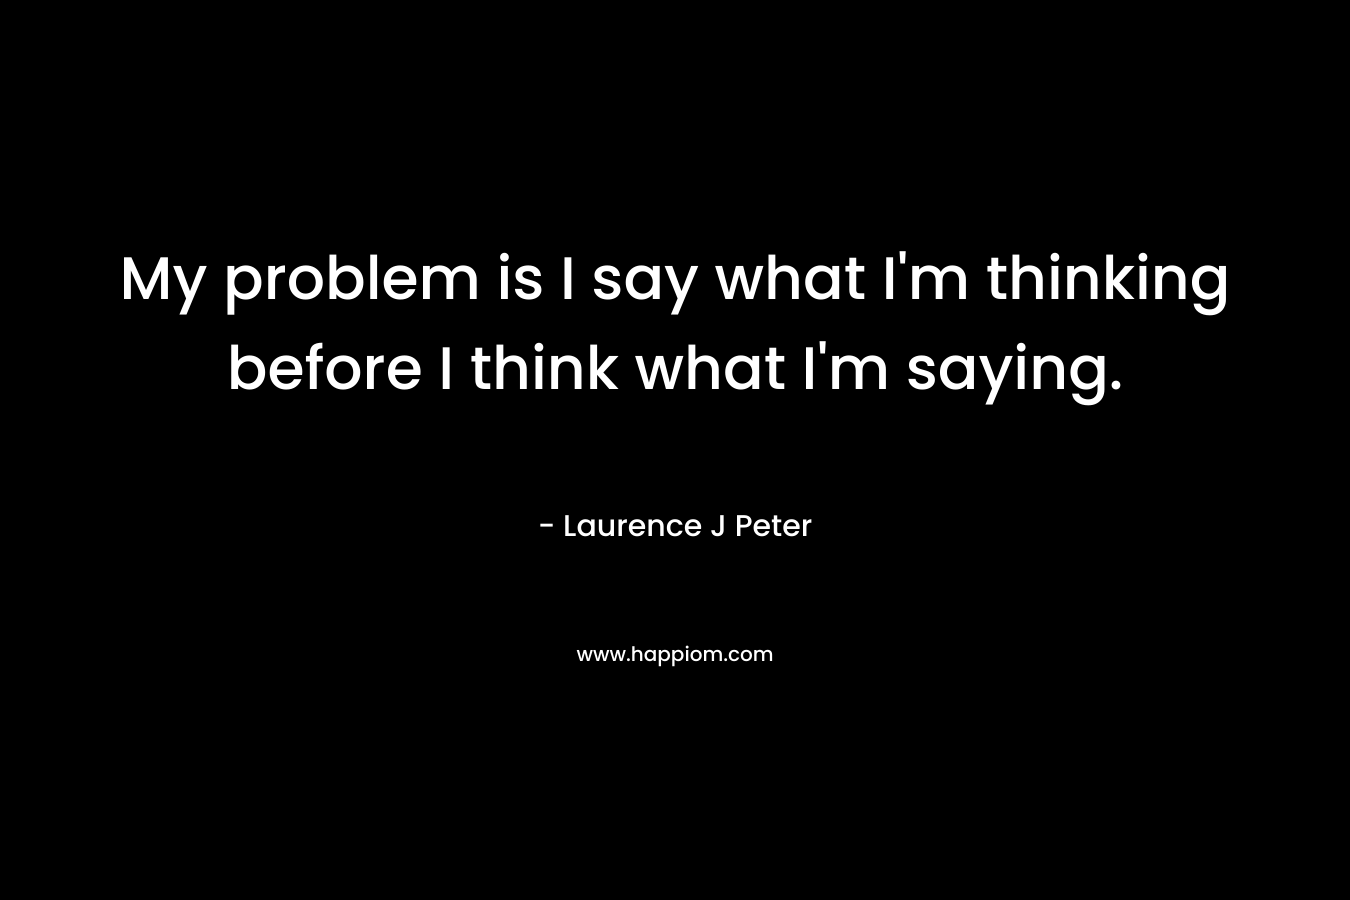 My problem is I say what I'm thinking before I think what I'm saying.